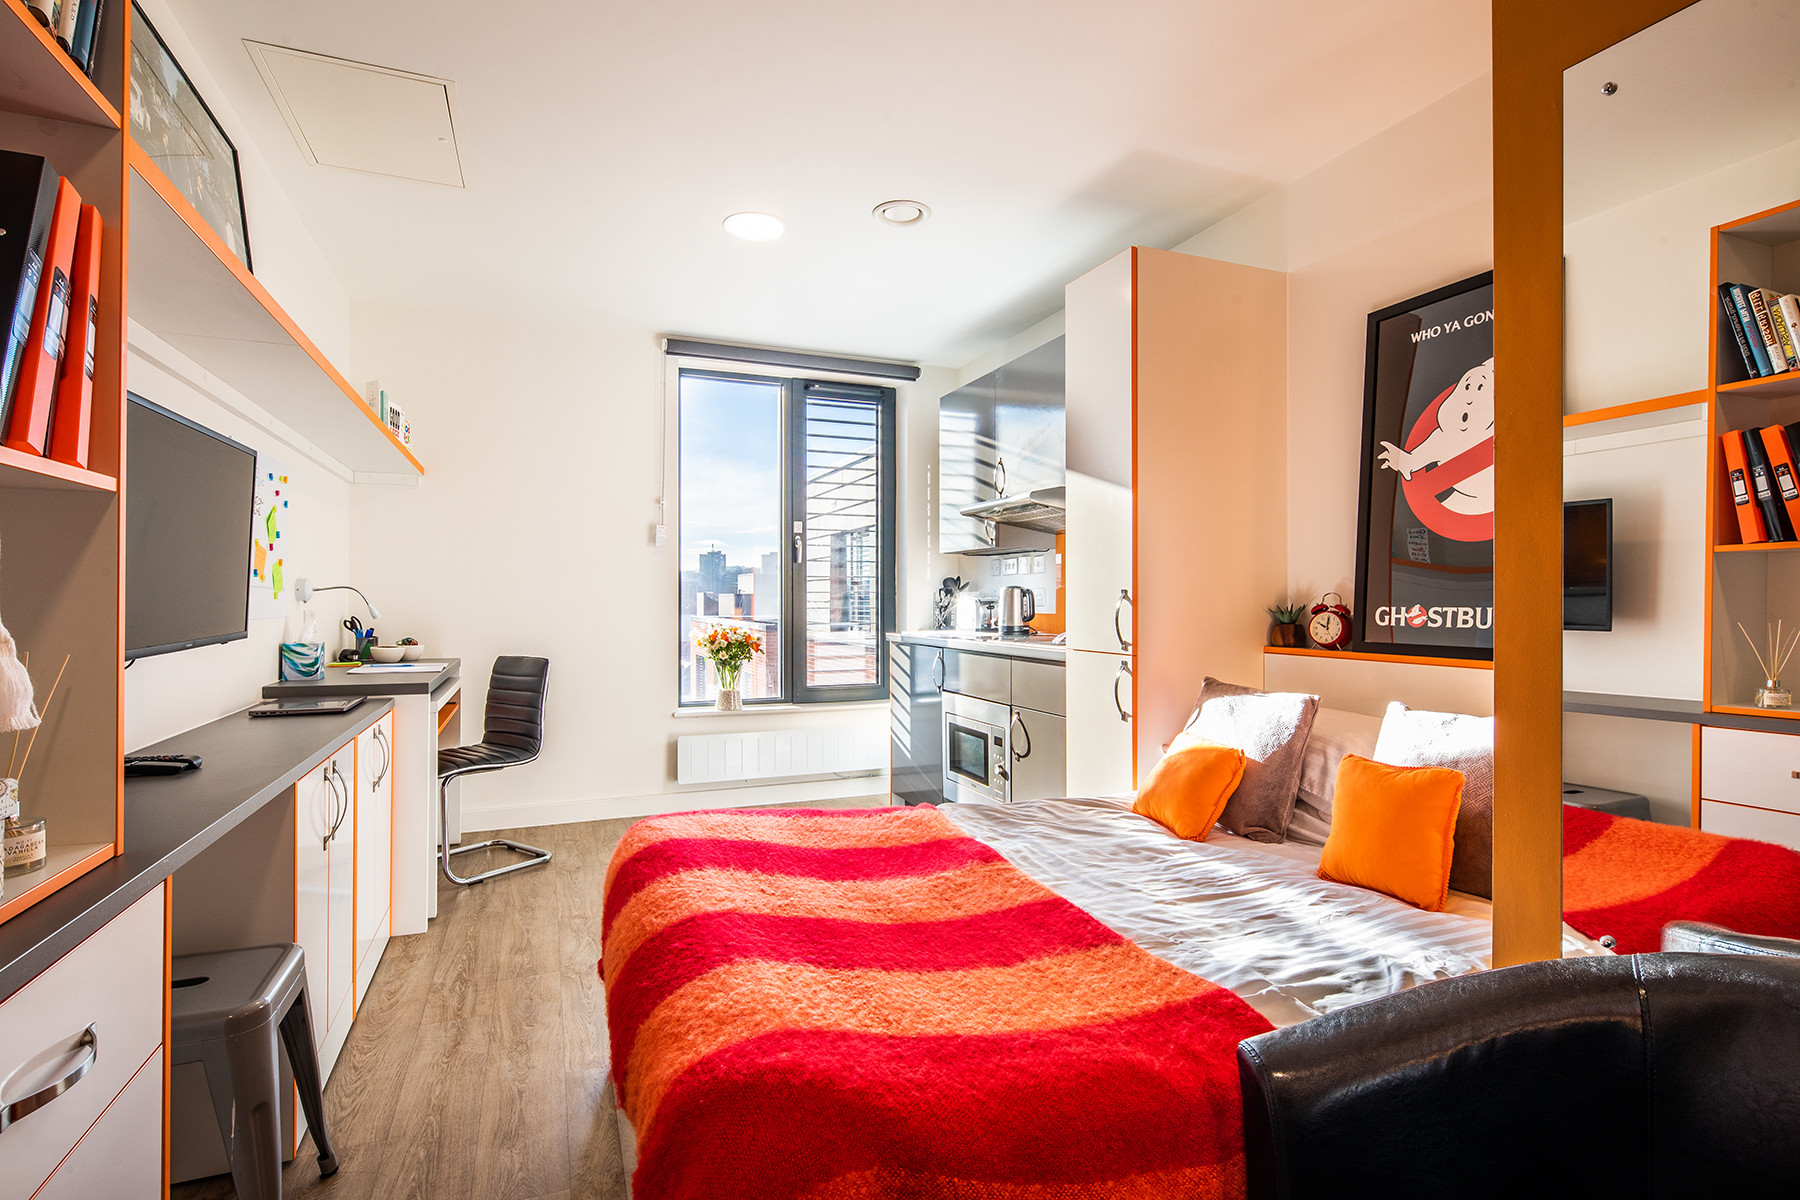 Let your flat. Student accommodation. Rent accommodation. Atira student accommodation. Accommodation shared Room.